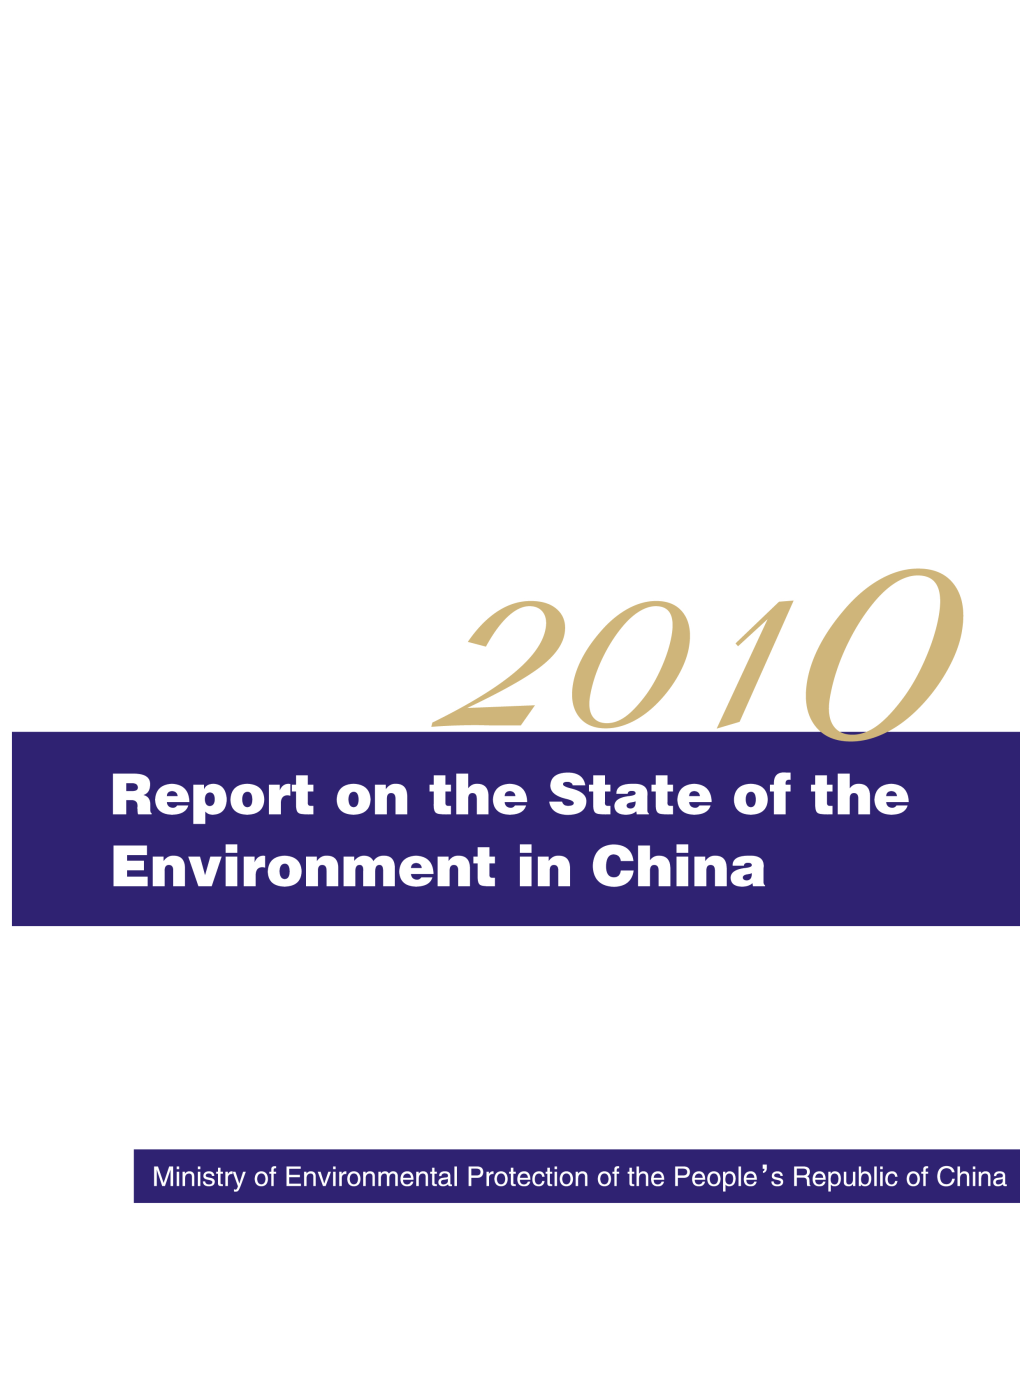 Report on the State of the Environment in China 2010